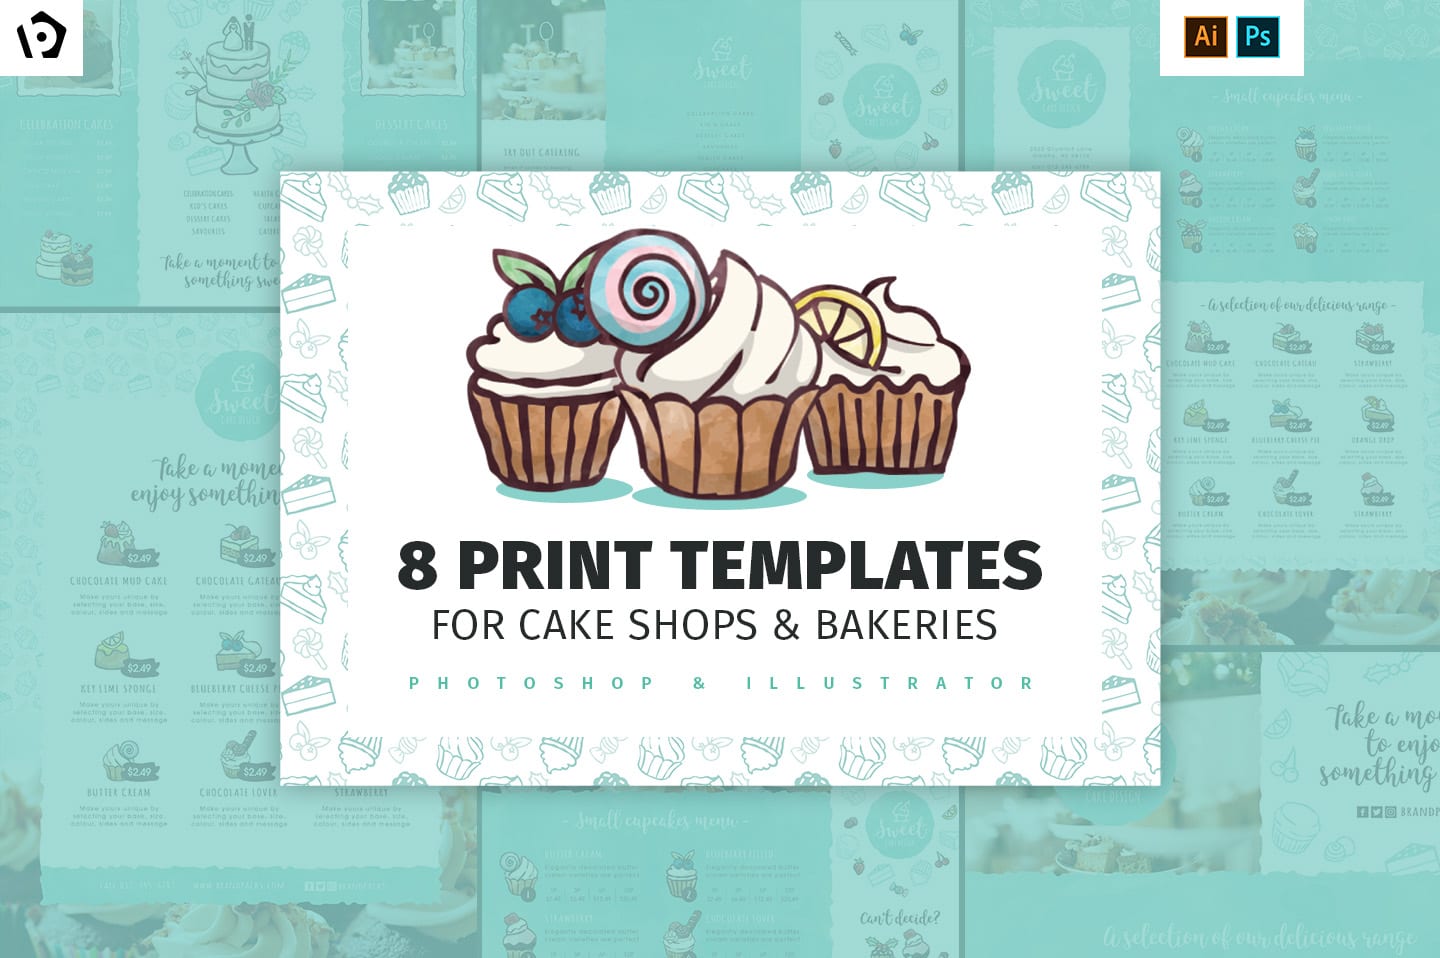 Cake Shop Templates Pack